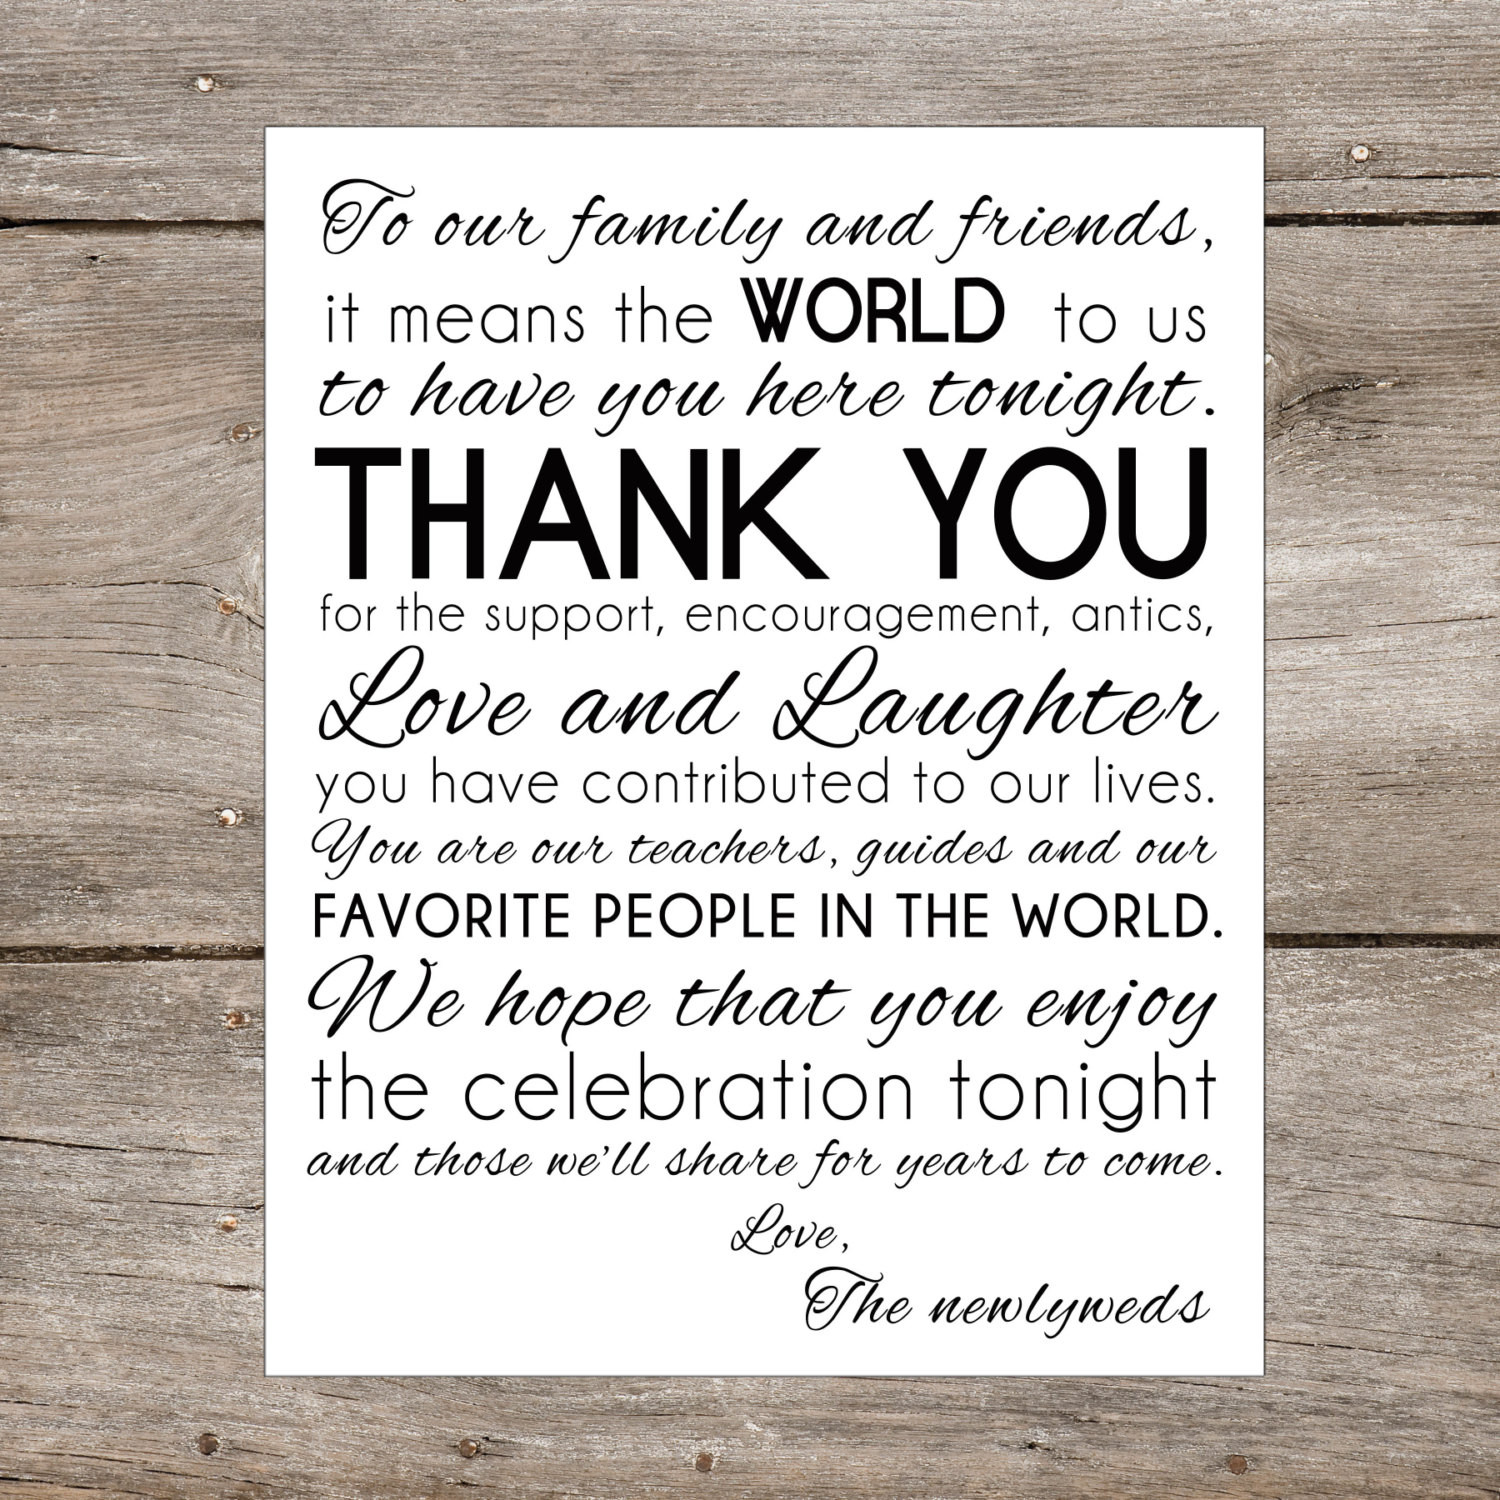 Thank You Quotes For Friends And Family
 Thank You Quotes For Friends And Family QuotesGram